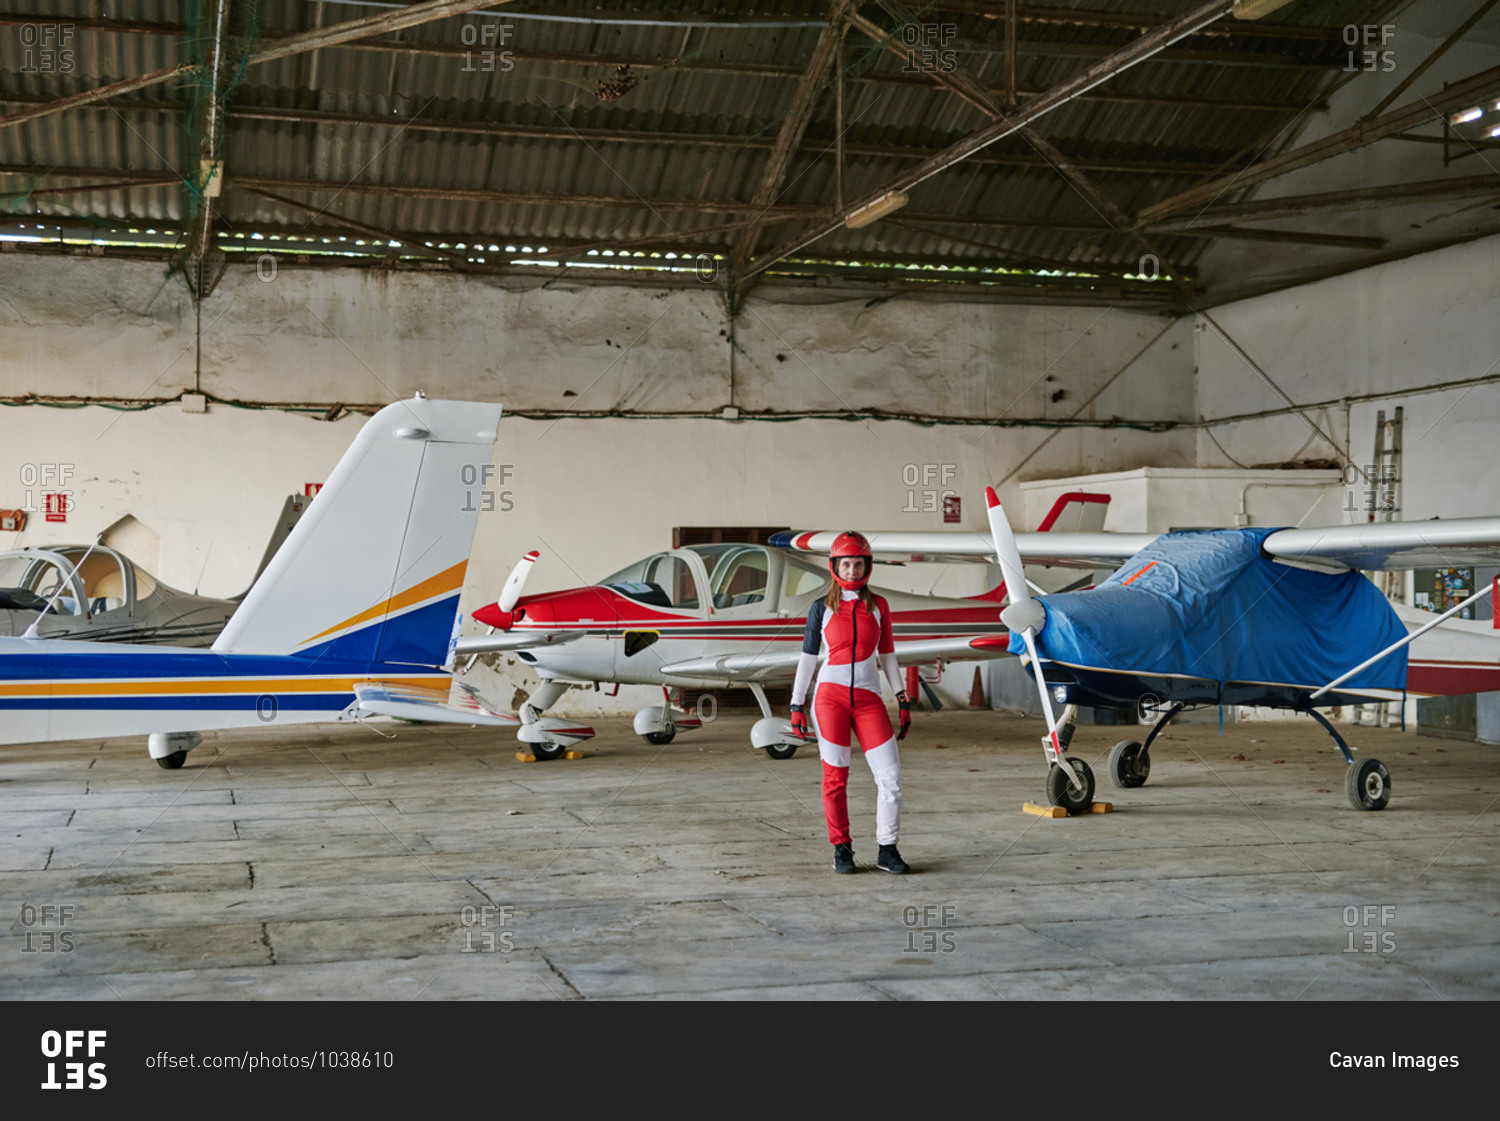 Young female skydiver in a plane hangar surrounded by planes